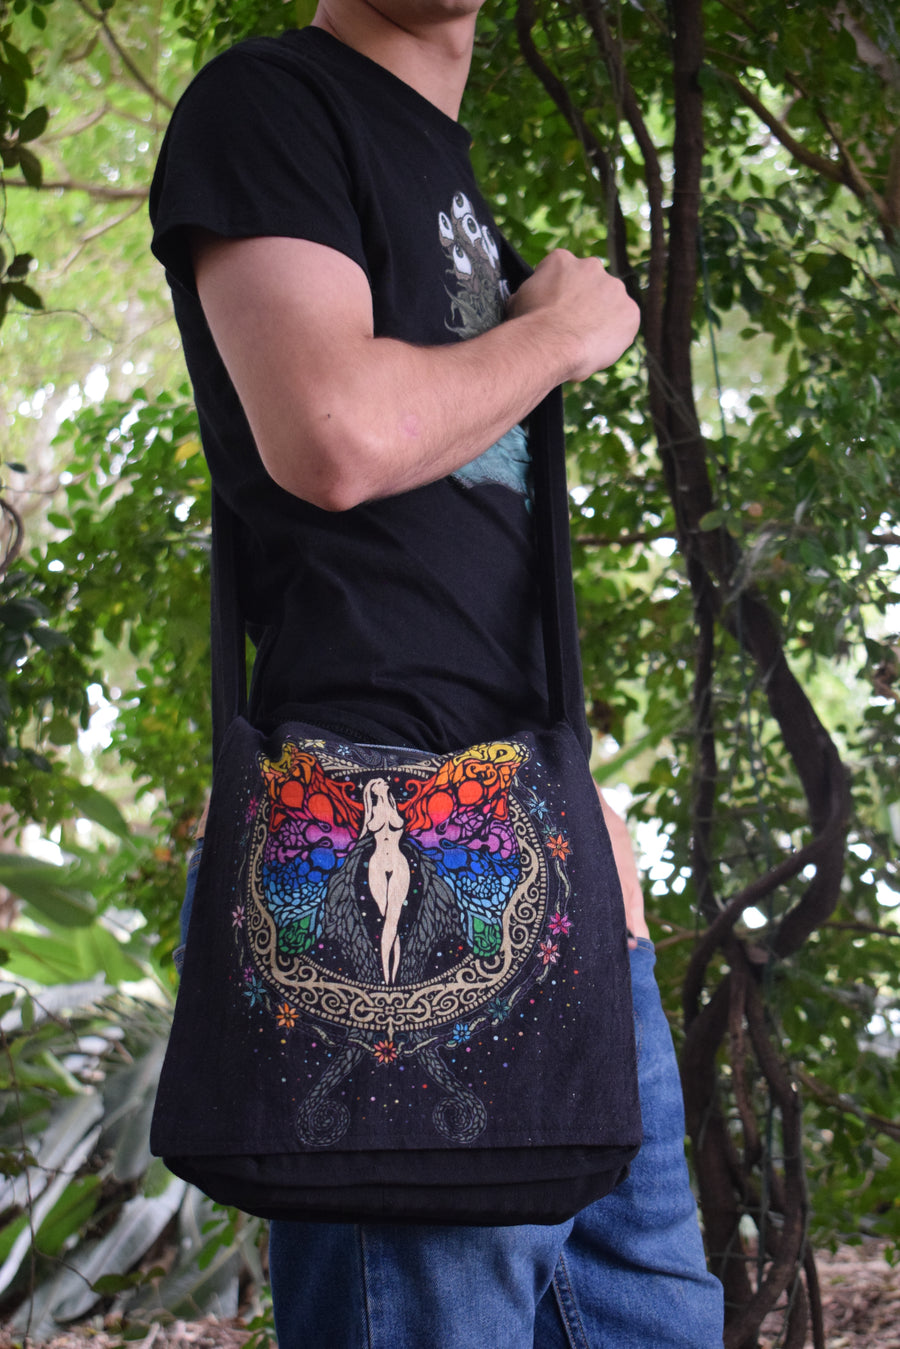 Rainbow angel, fairy, goddess printed on black shoulder bag worn on person in blue jeans and black t-shirt 